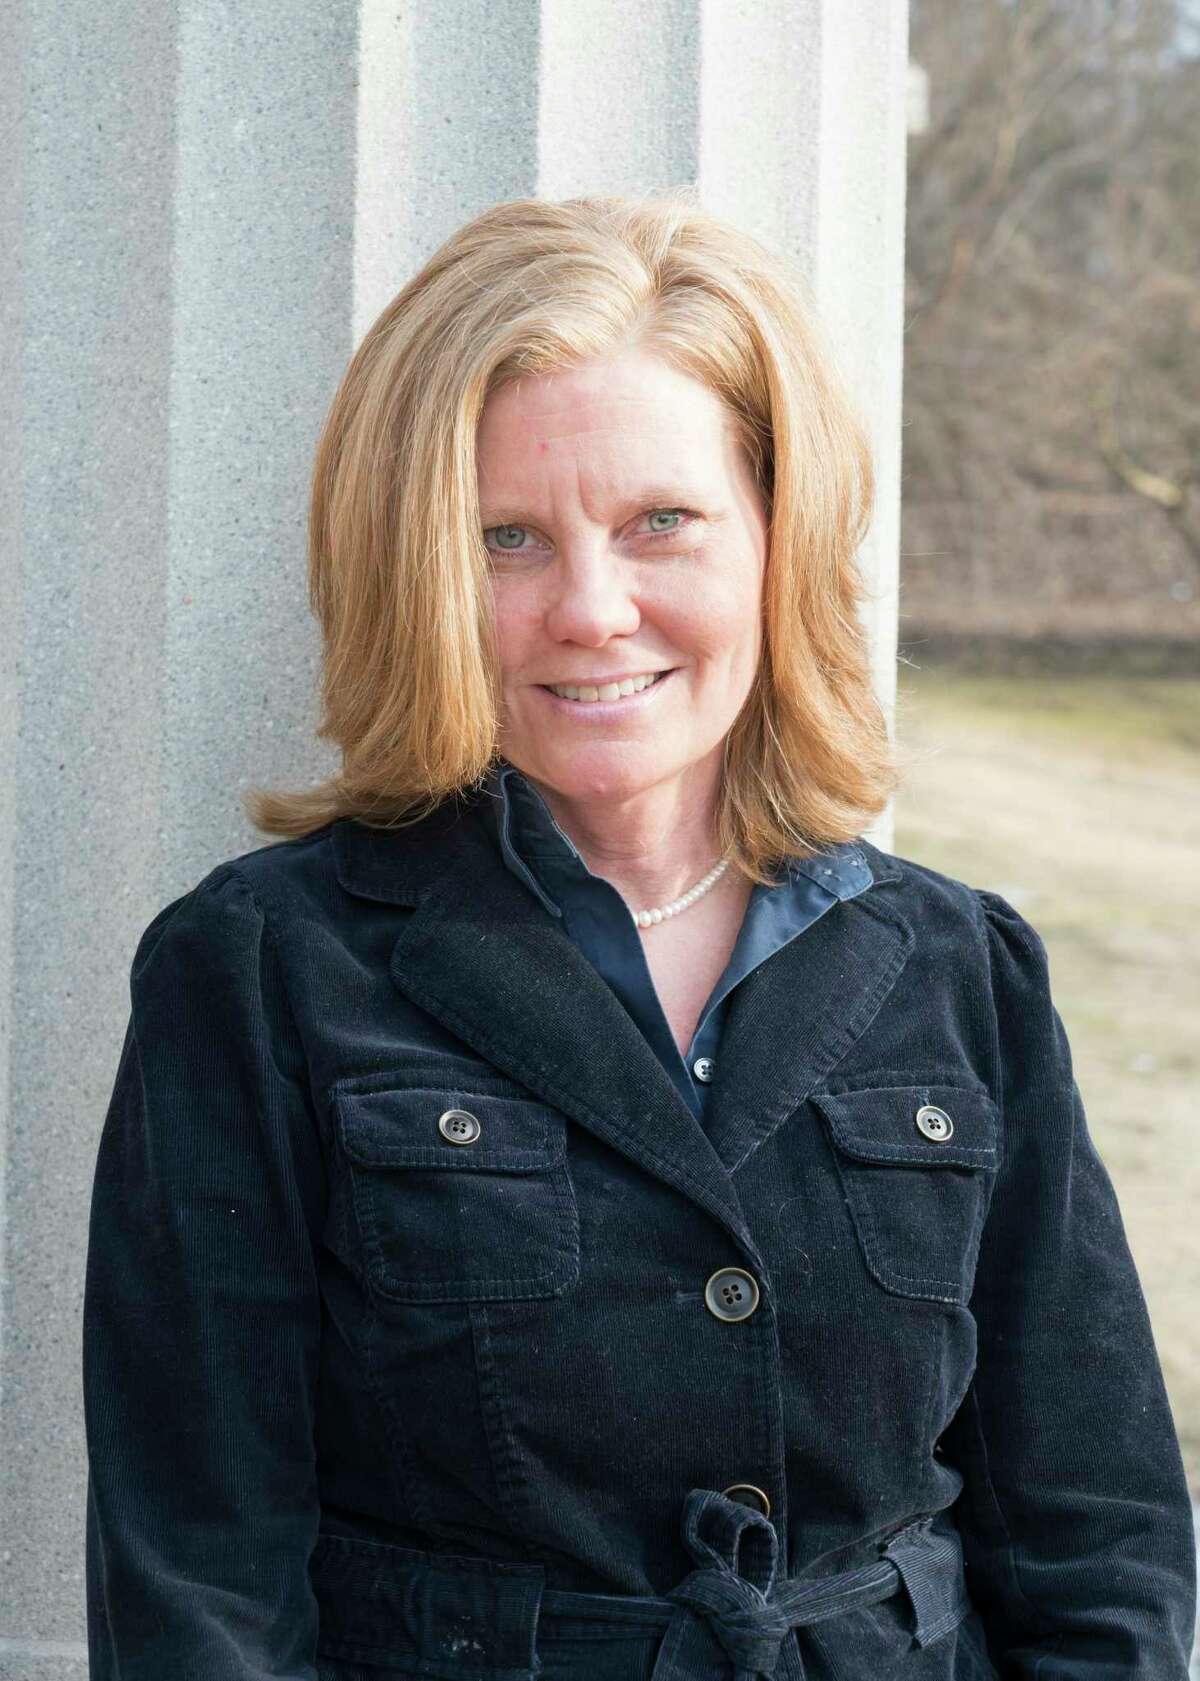 Patricia Morrison announced Saturday, April 13, 2019, that she is running for the Saratoga Springs finance commissioner's seat currently held by Michele Madigan. (Provided photo)